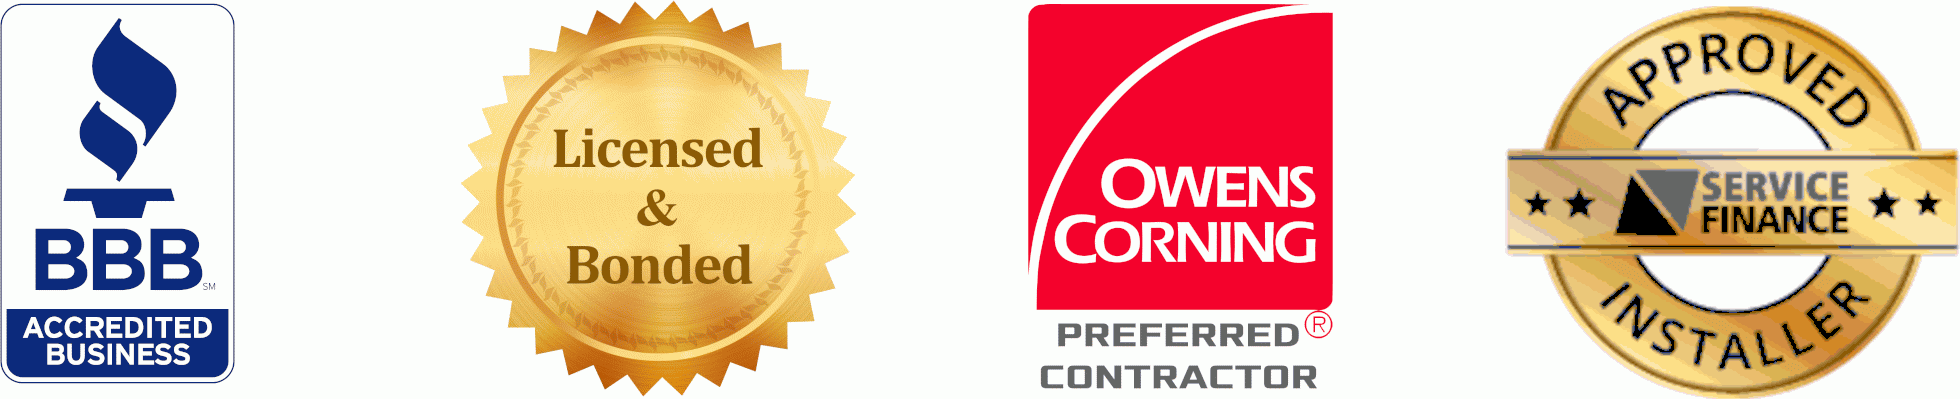 BBB Accredited, Licensed and Bonded, Owens Corning Preferred Contractor, Service Finance Approved Installer